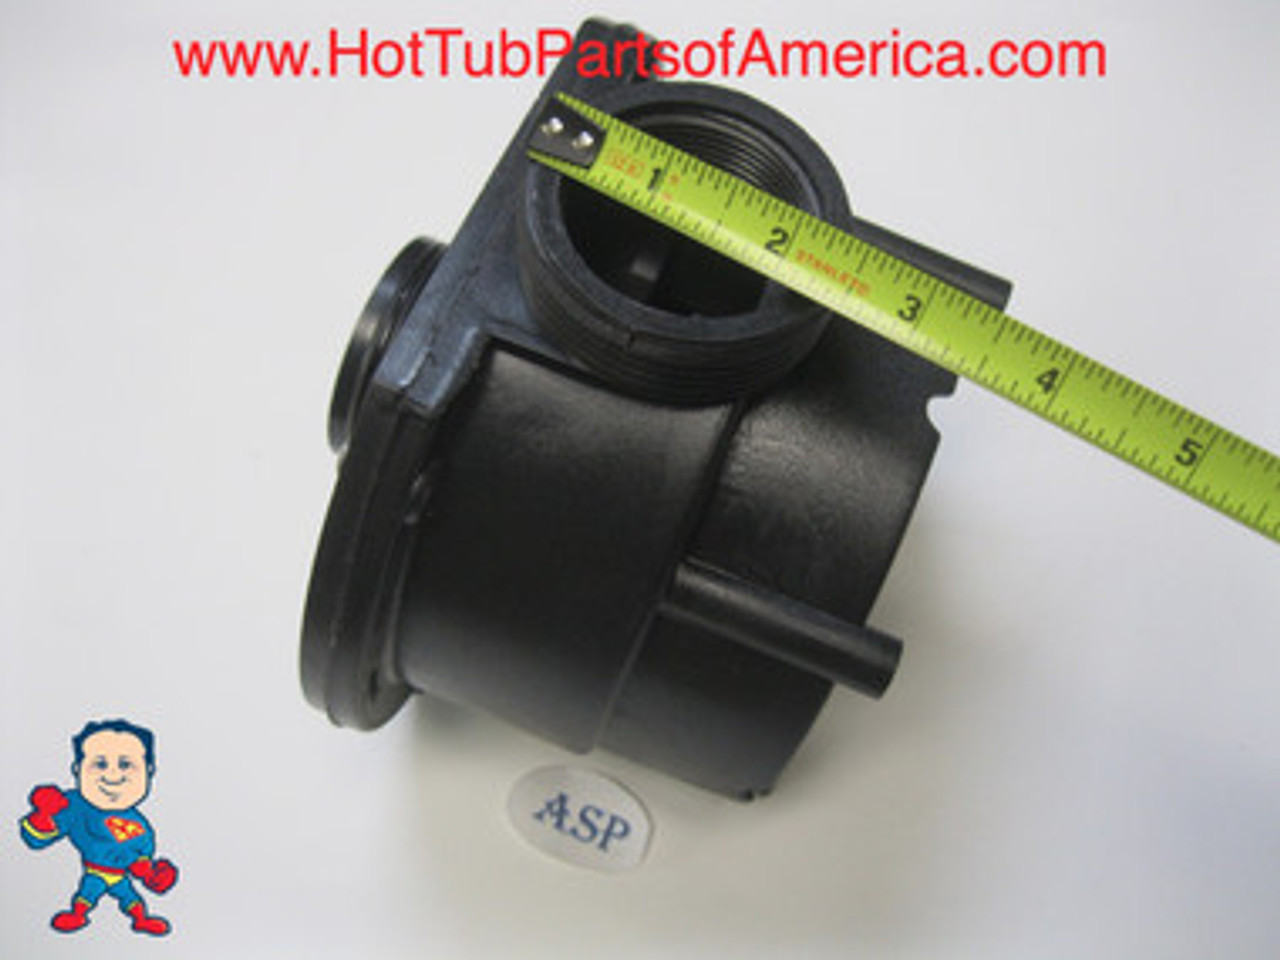 Wet End,  Aqua-Flo, FMCP, 1.5HP, 1-1/2"mbt, 48 frame Flo-Master Series, TMCP
The Suction and Pressure sides both Measure about 2-3/8" Across the threads and is called 1 ½”!